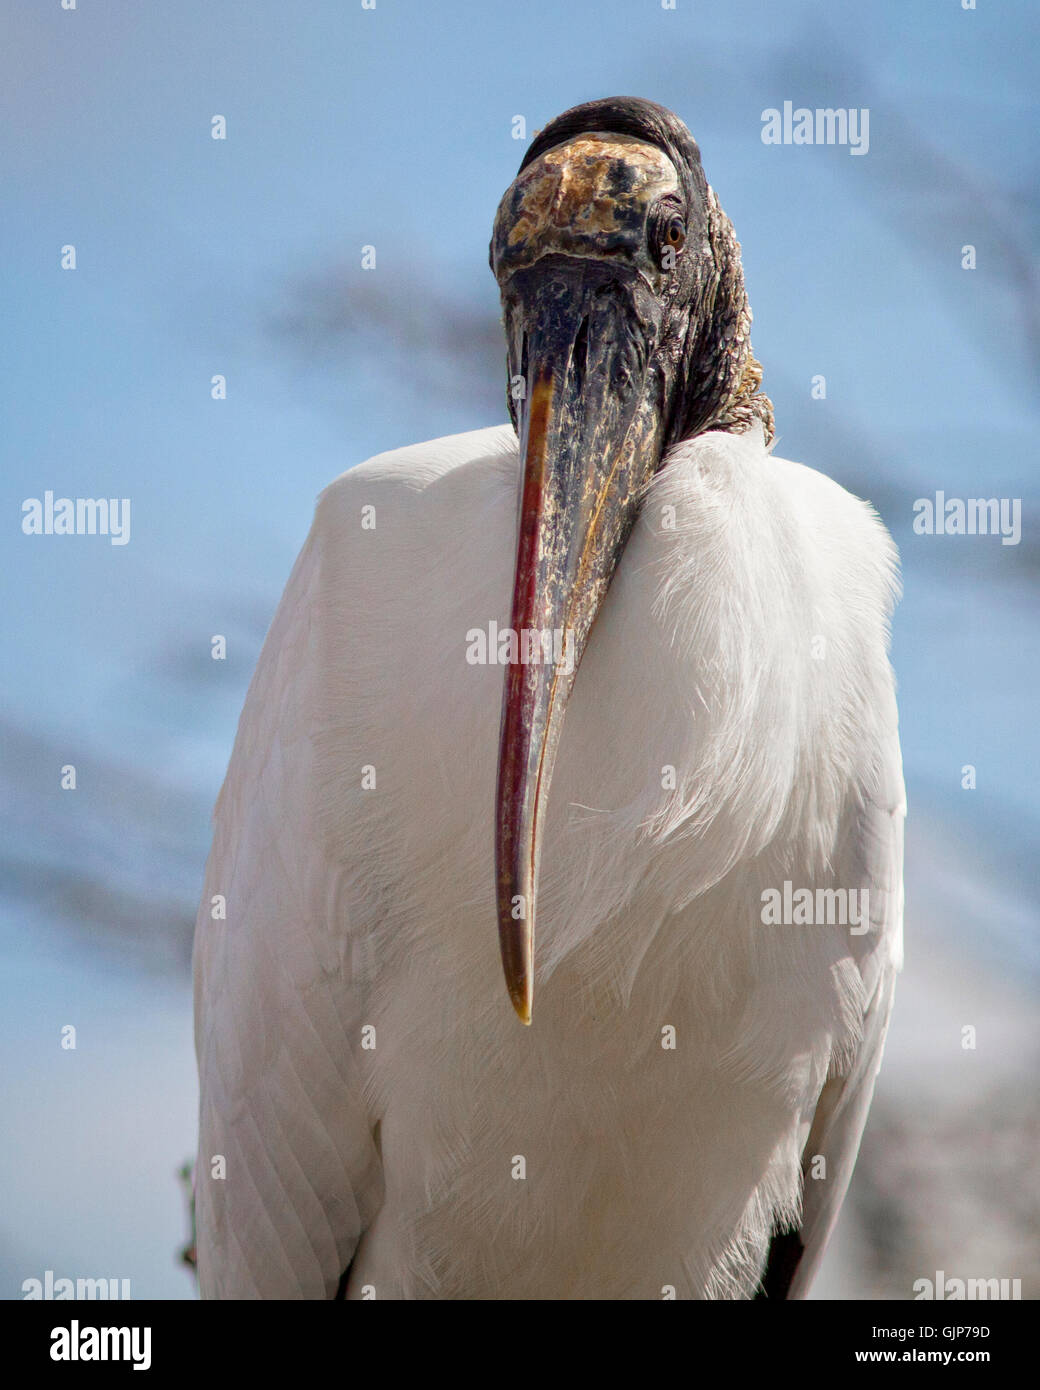 Head & Shoulder Portrait of a Mature, Elegant Wood Stork with facial detail of its forehead plate, bill texture and flinty neck. Stock Photo